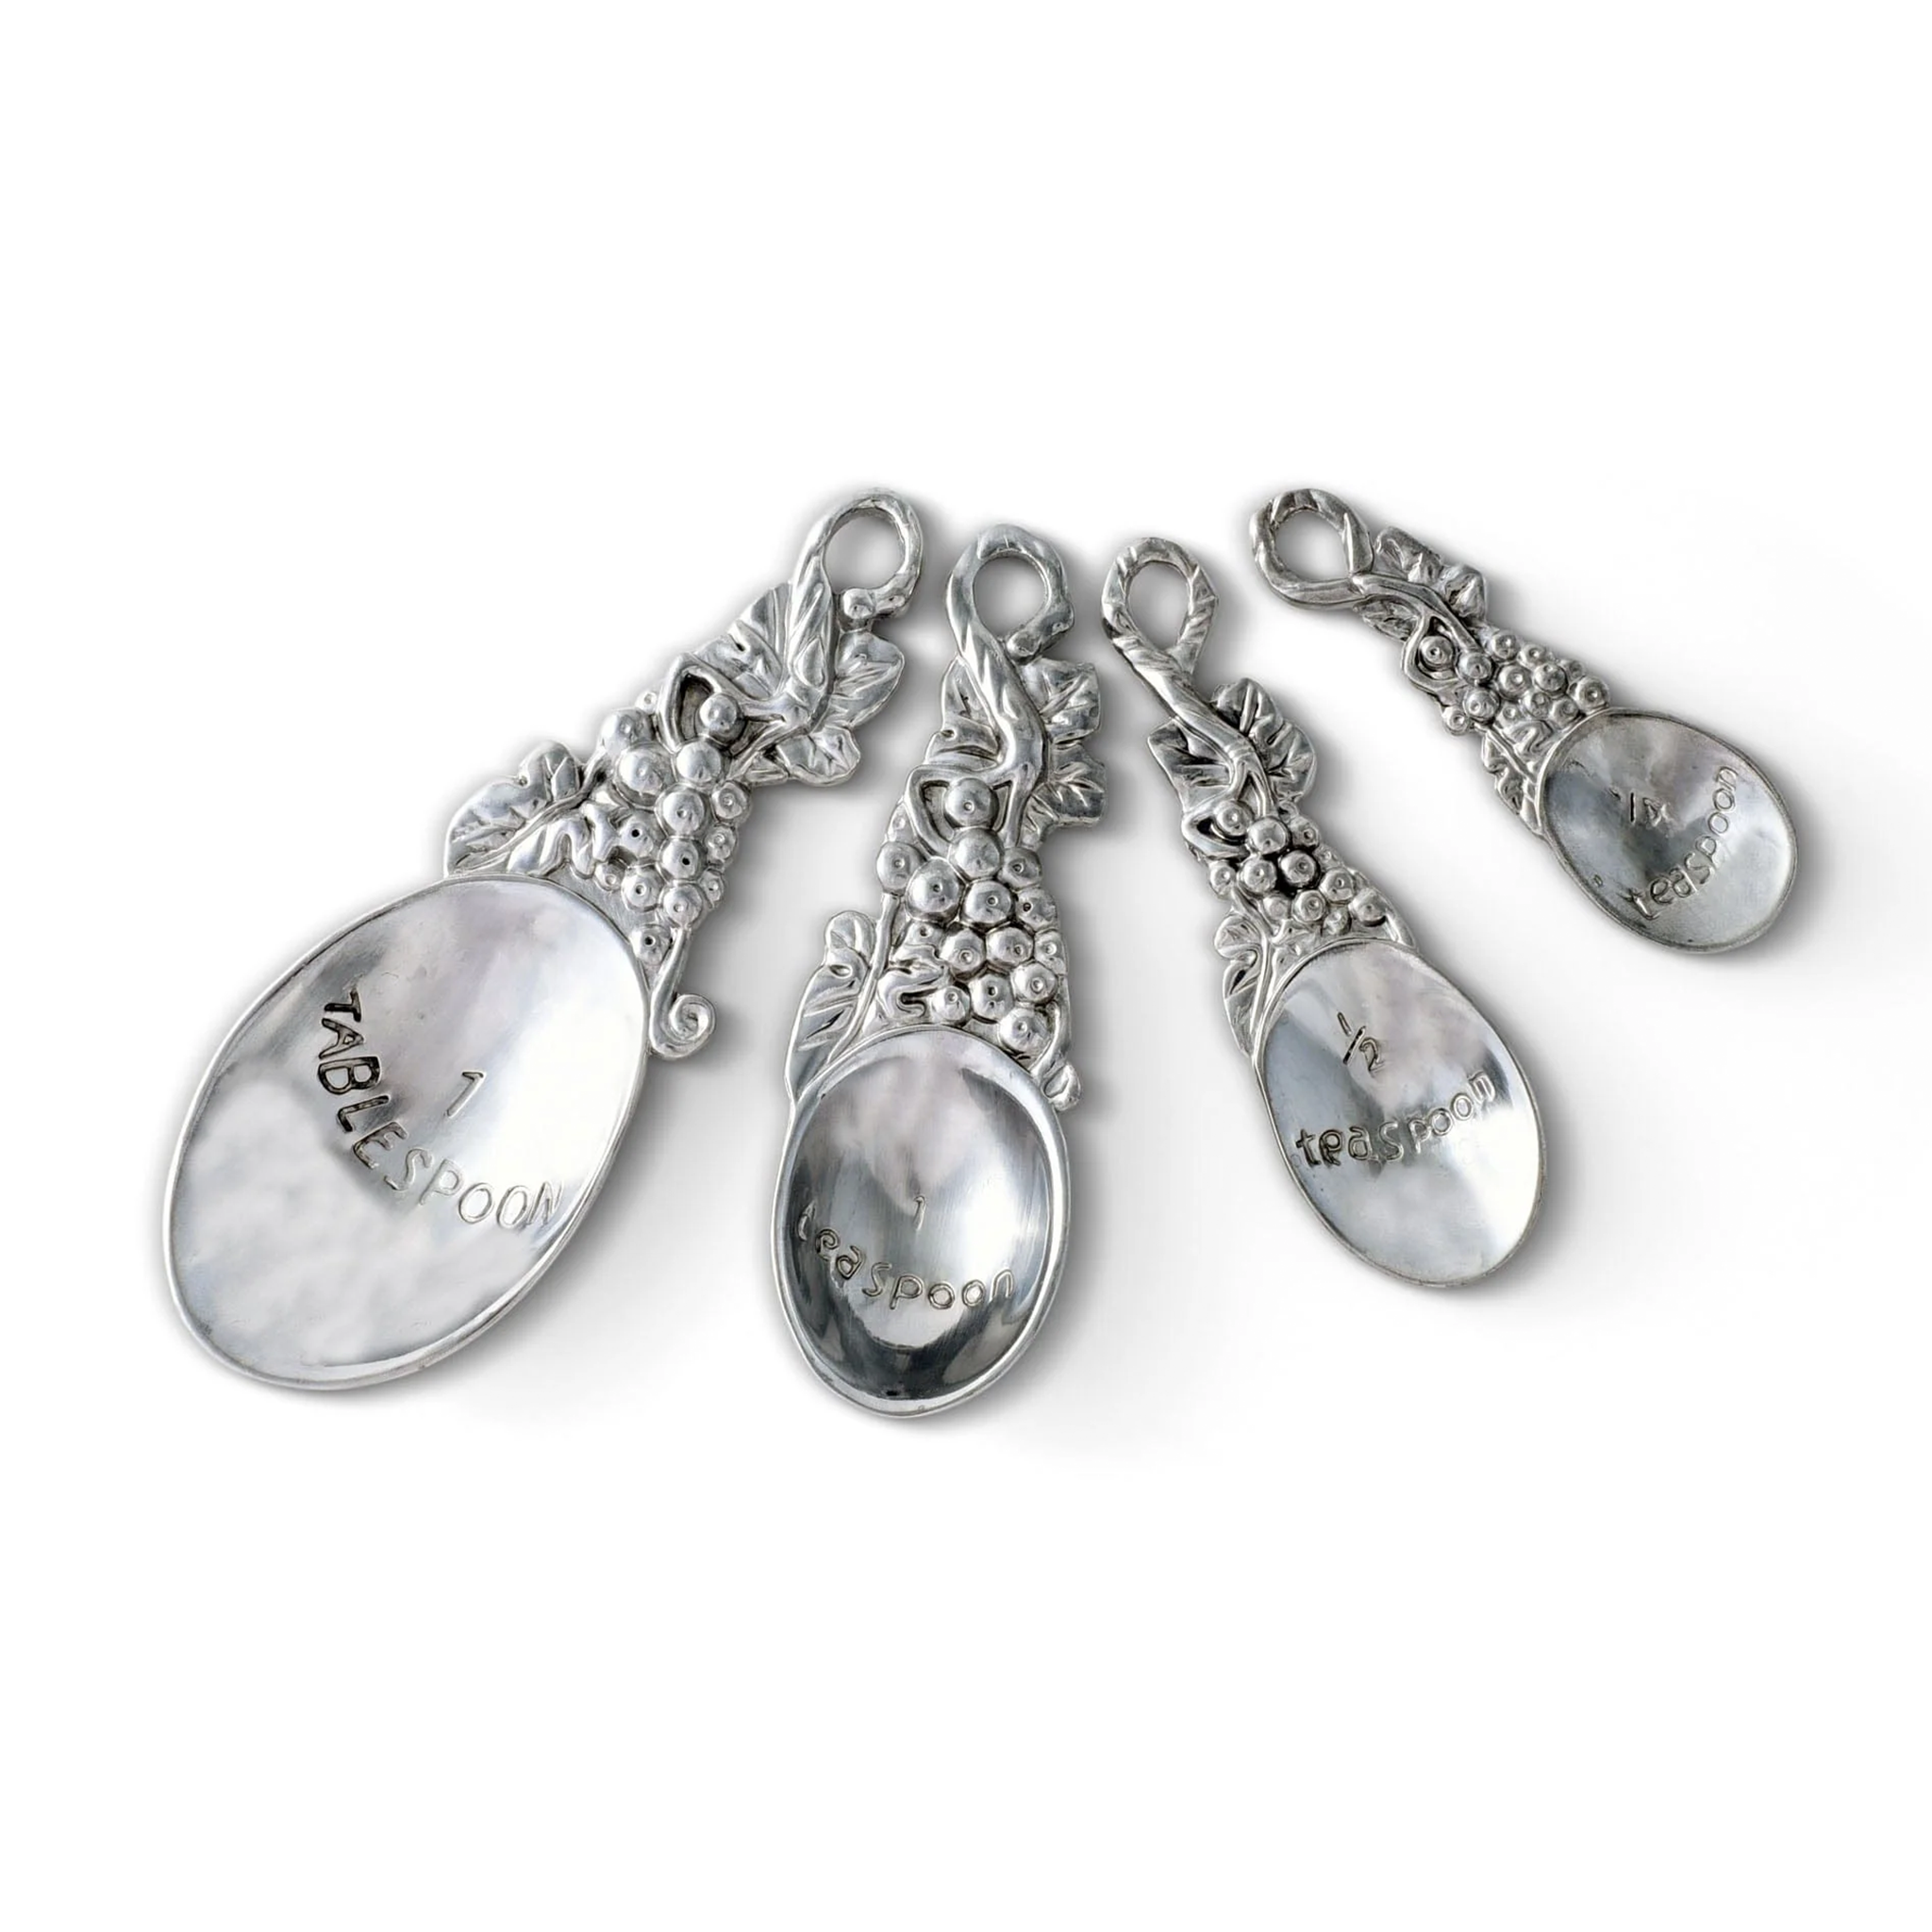 a set of four metal measuring spoons with intricate grape, leaves, and vines pattern on them